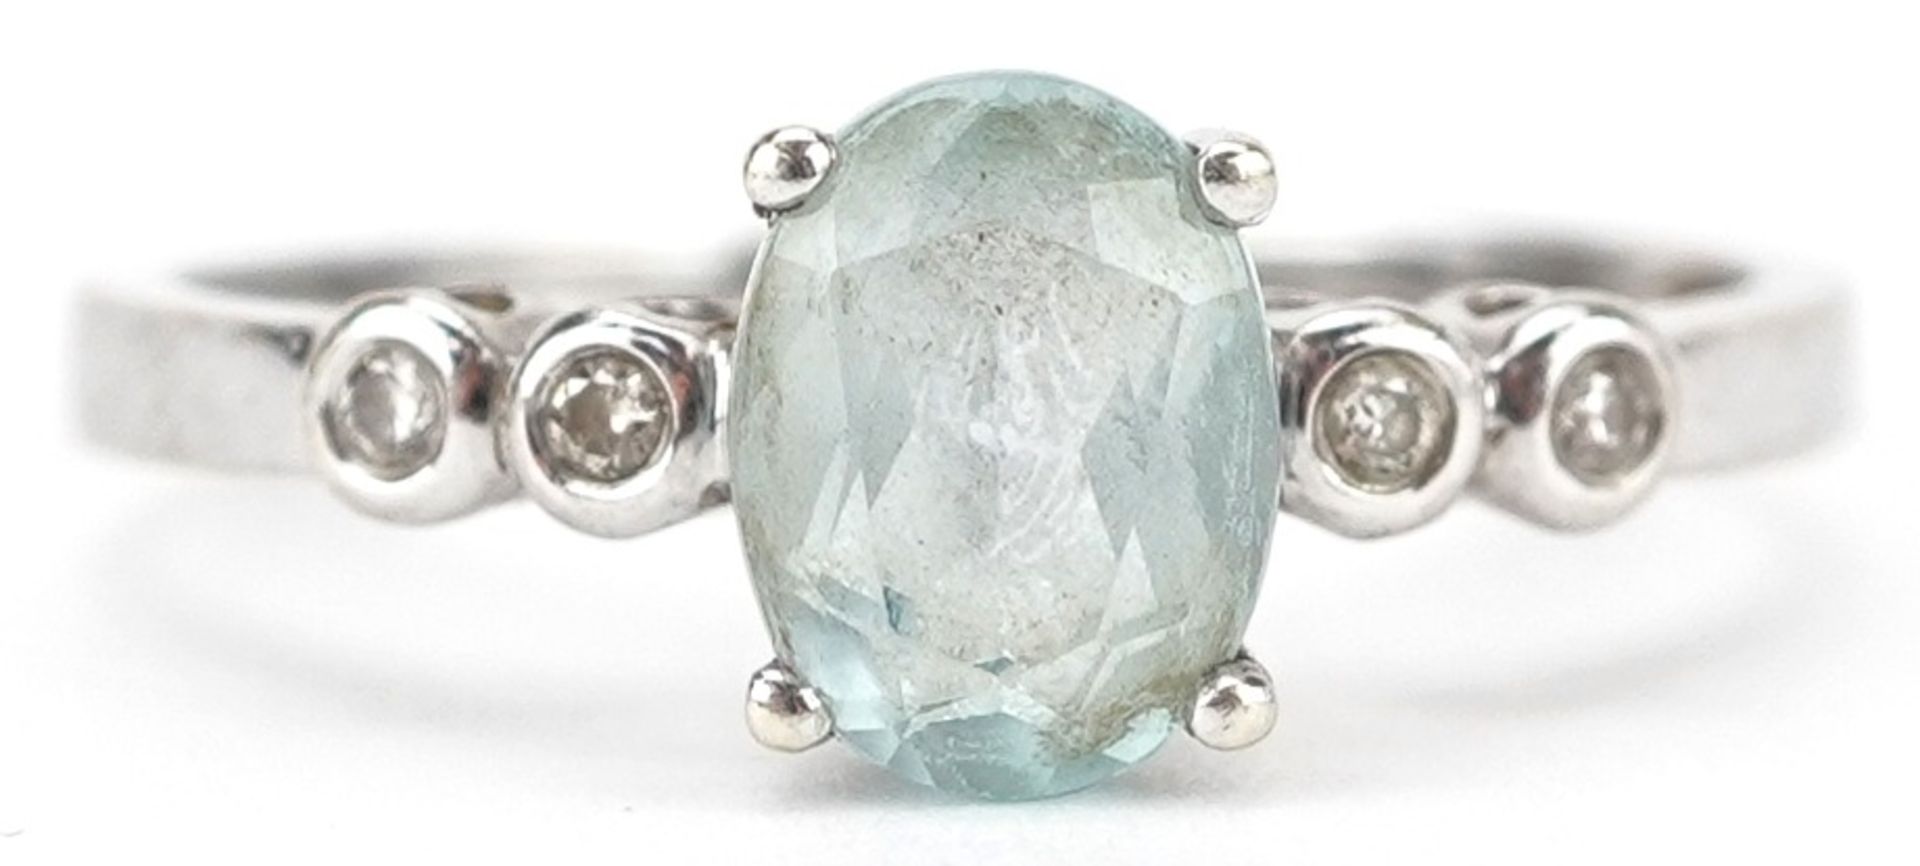 9ct white gold blue topaz ring with diamond set shoulders, the topaz approximately 8.0mm x 6.0mm x